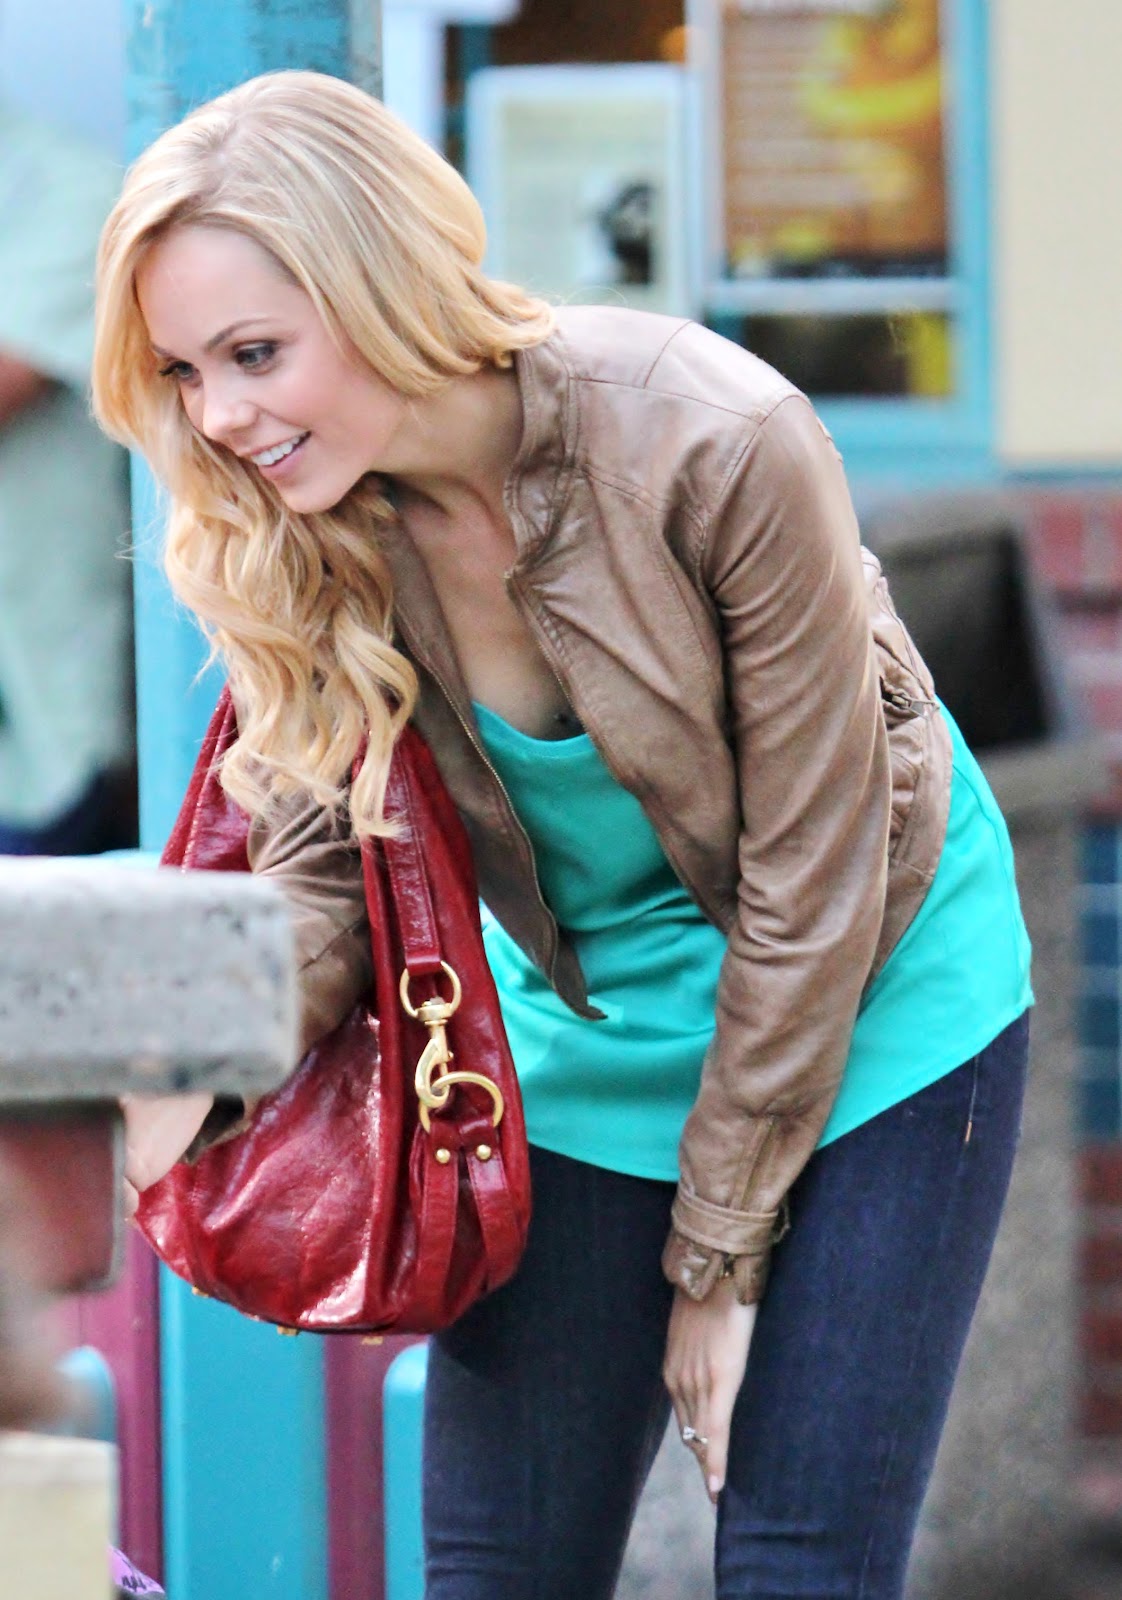 Pics of Laura Vandervoort from the "Twinkle" set in Vancouver.